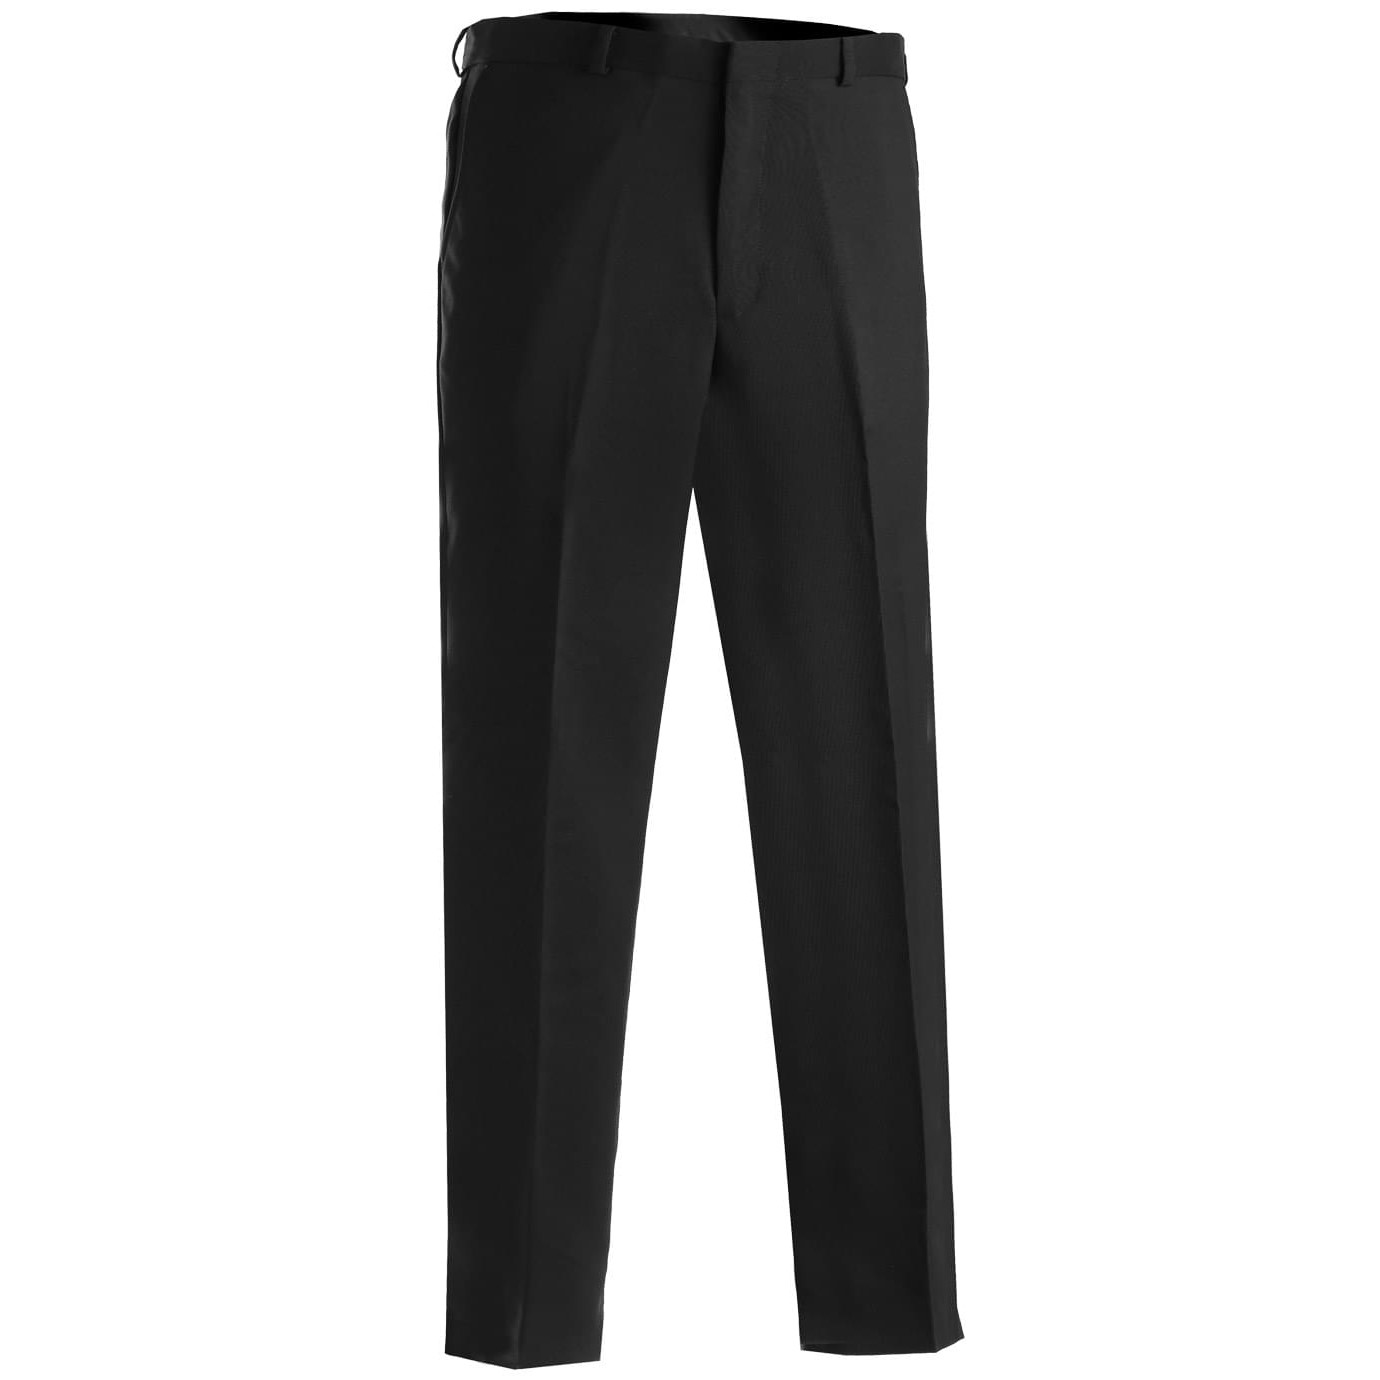 EDWARDS POLYESTER TROUSERS